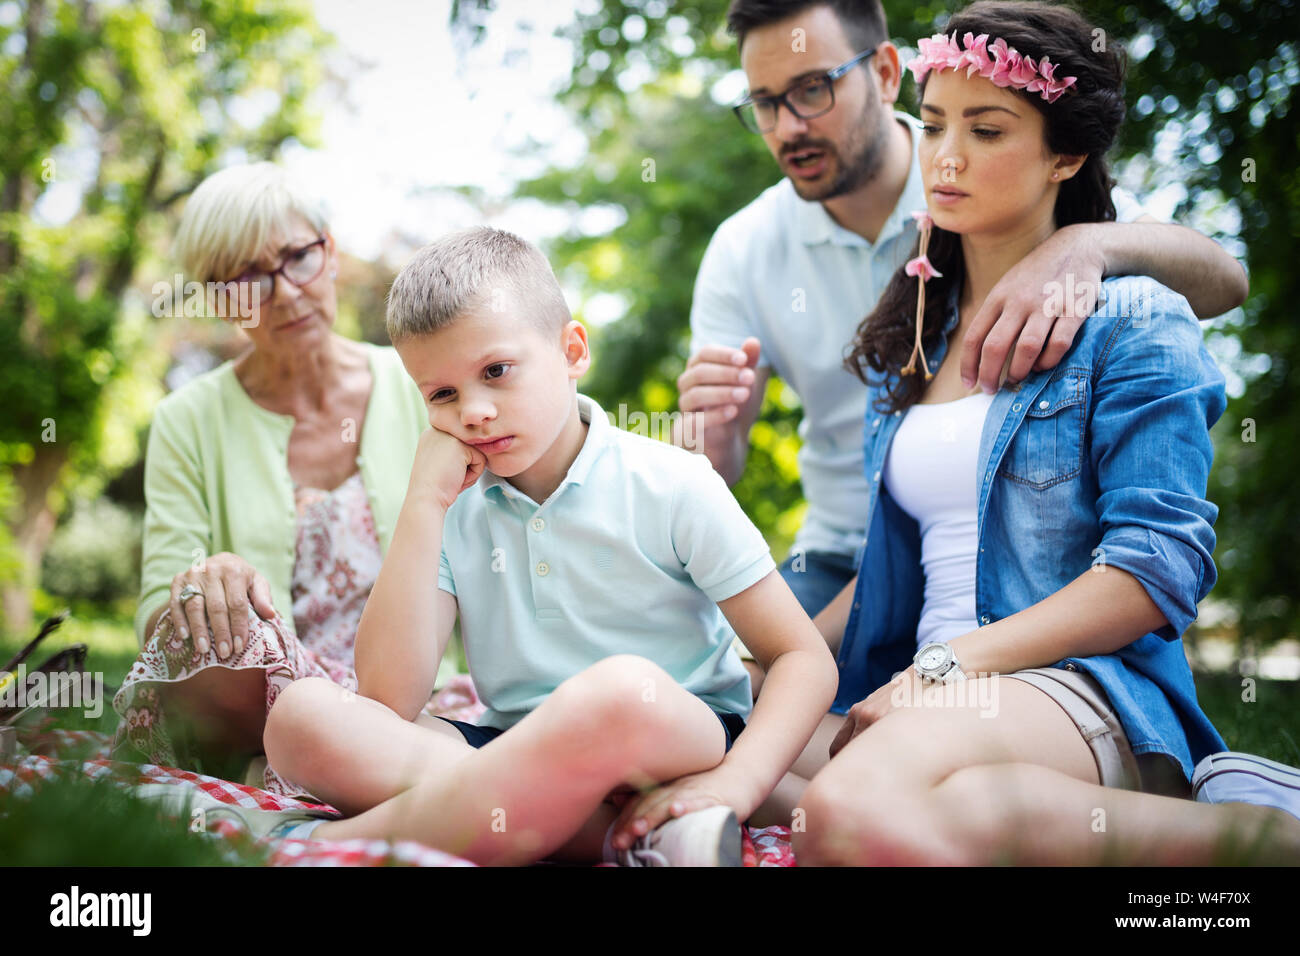 Family consoling little stubborn child and managing emotions Stock Photo